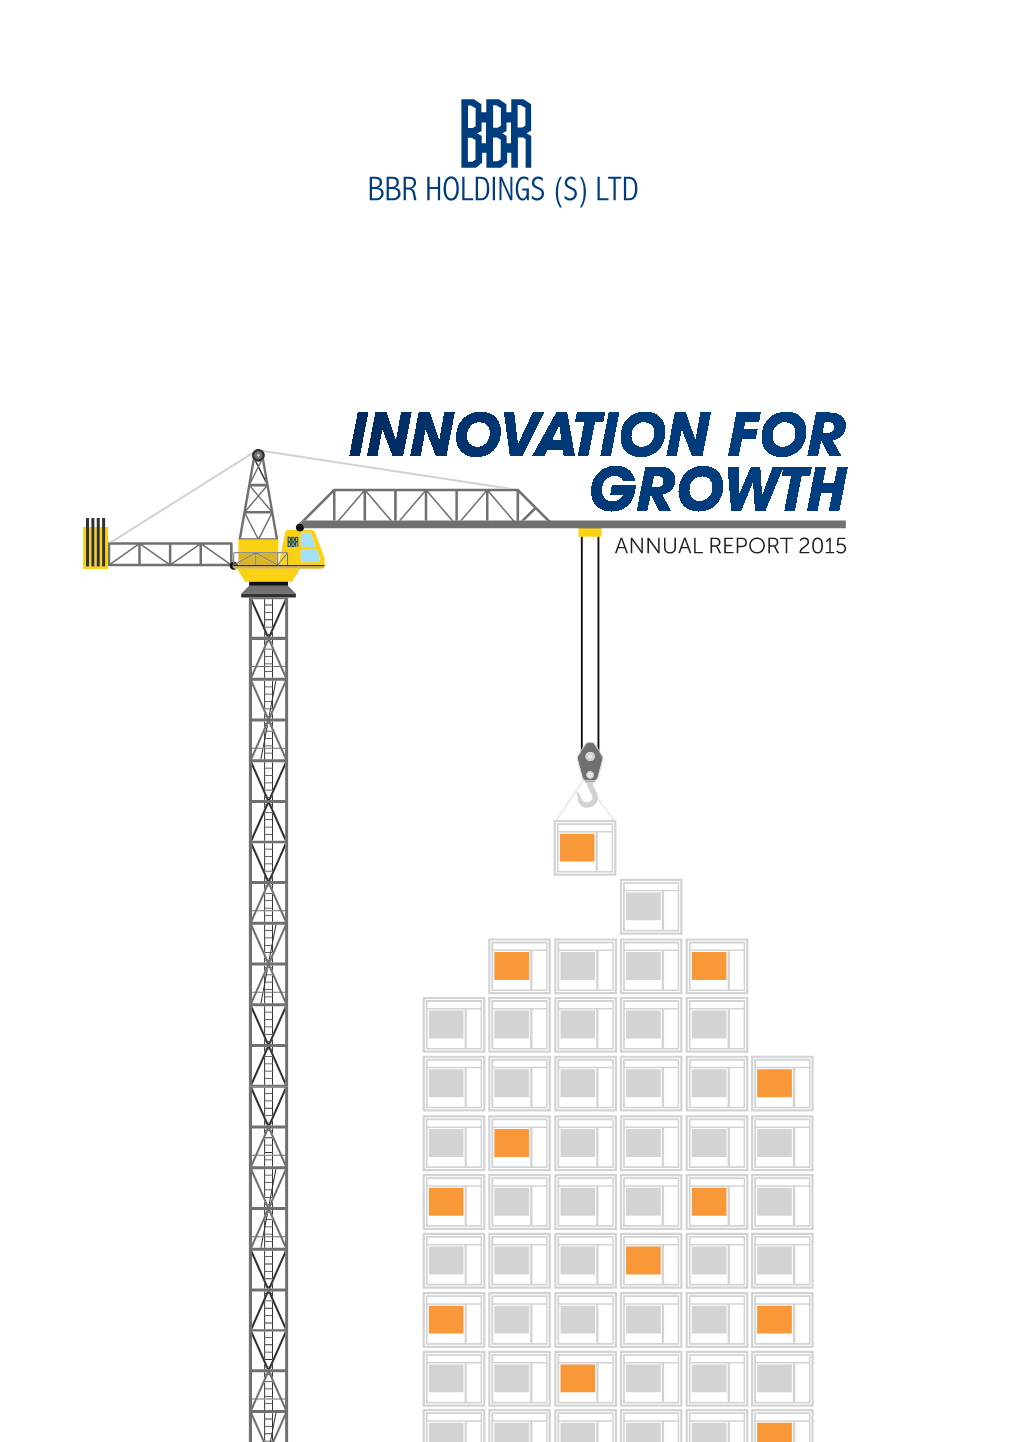 Innovation for Growth ANNUAL REPORT 2015 CONTENTS